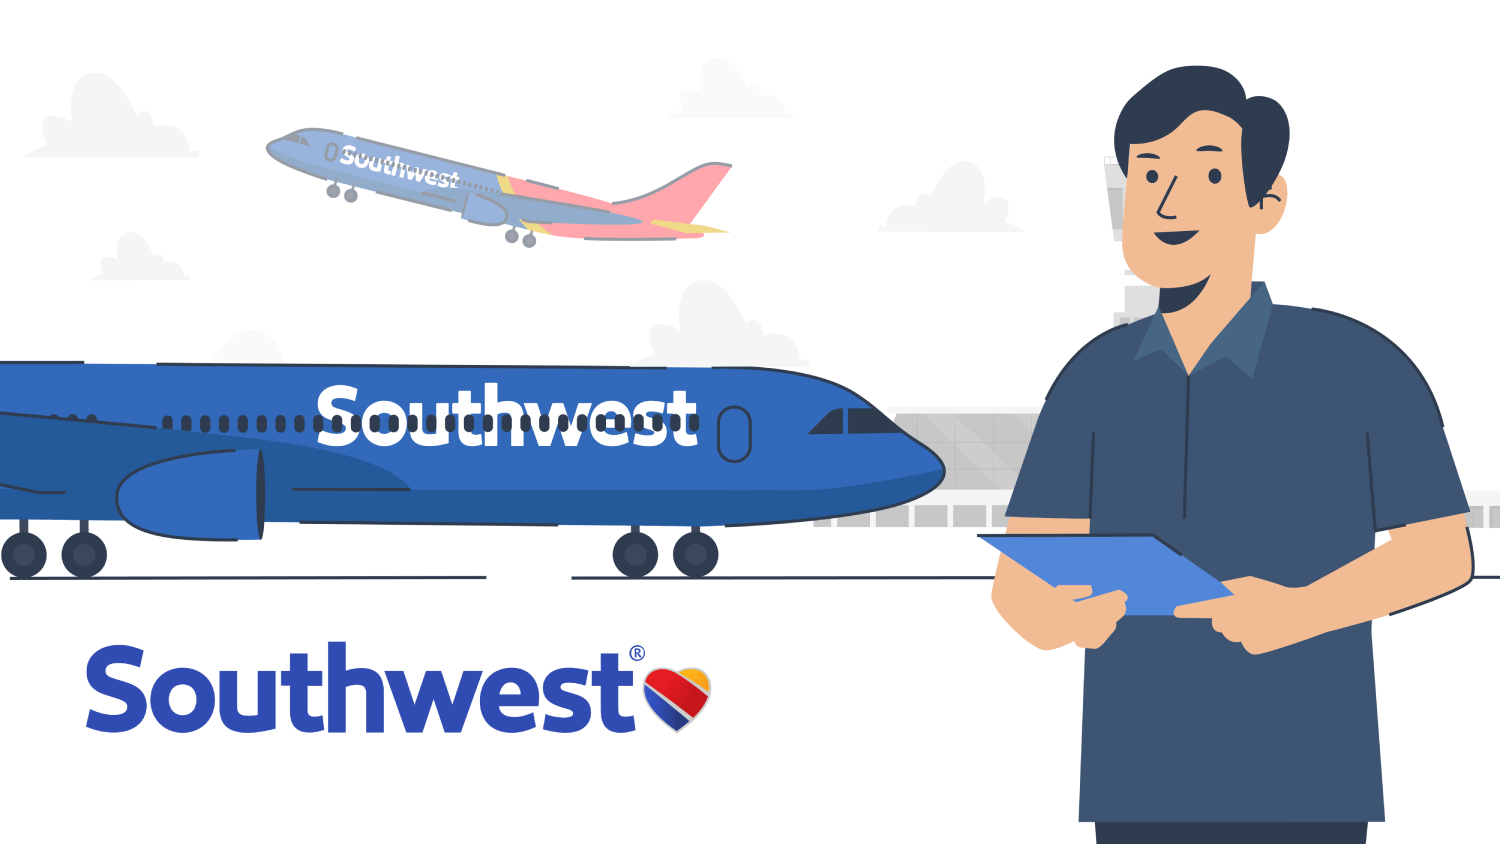 southwest airlines dog travel policy